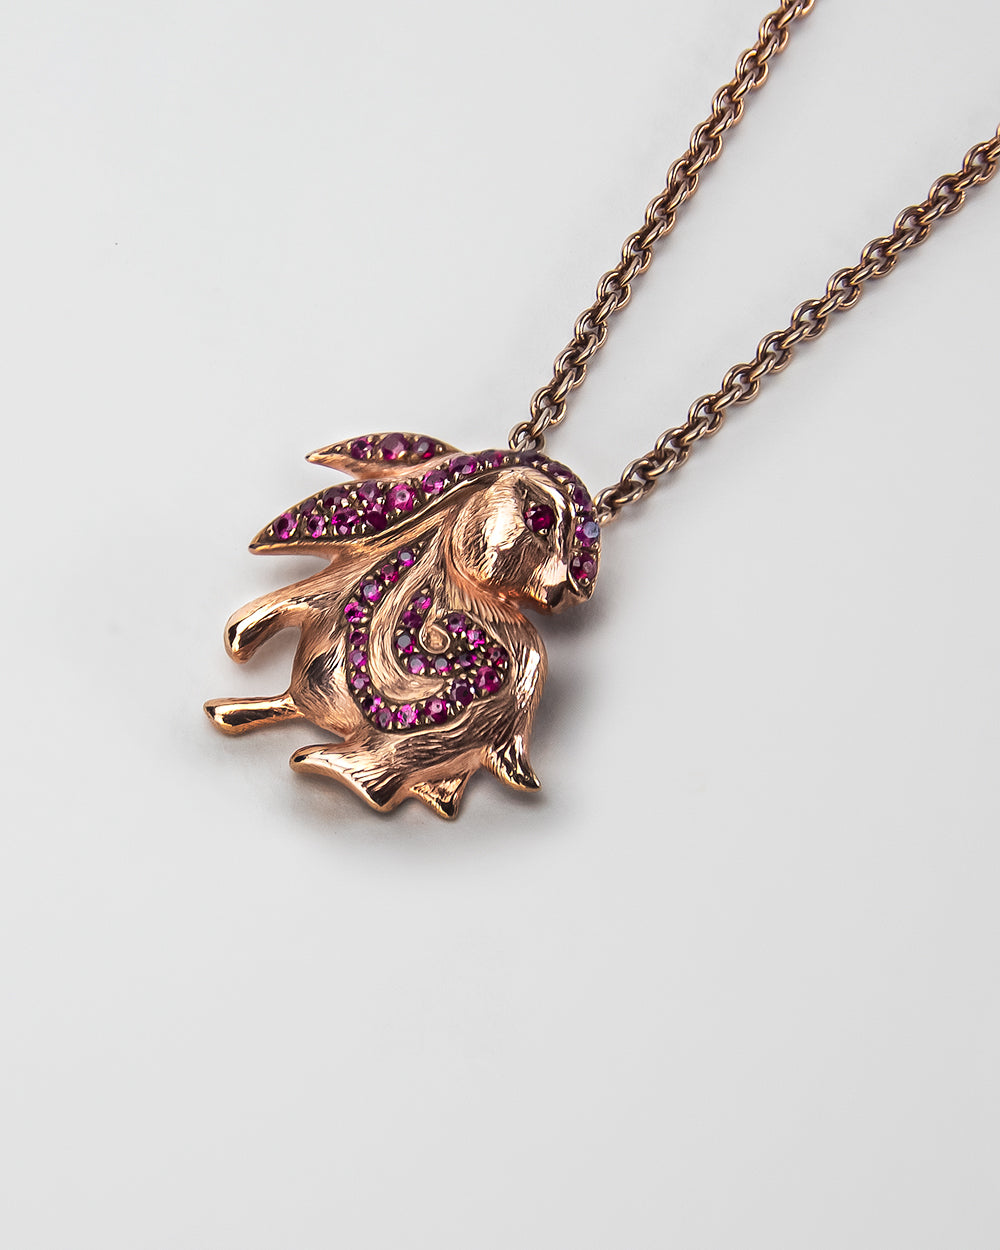 Rabbit Pendant crafted in sterling silver with rose gold plating. 